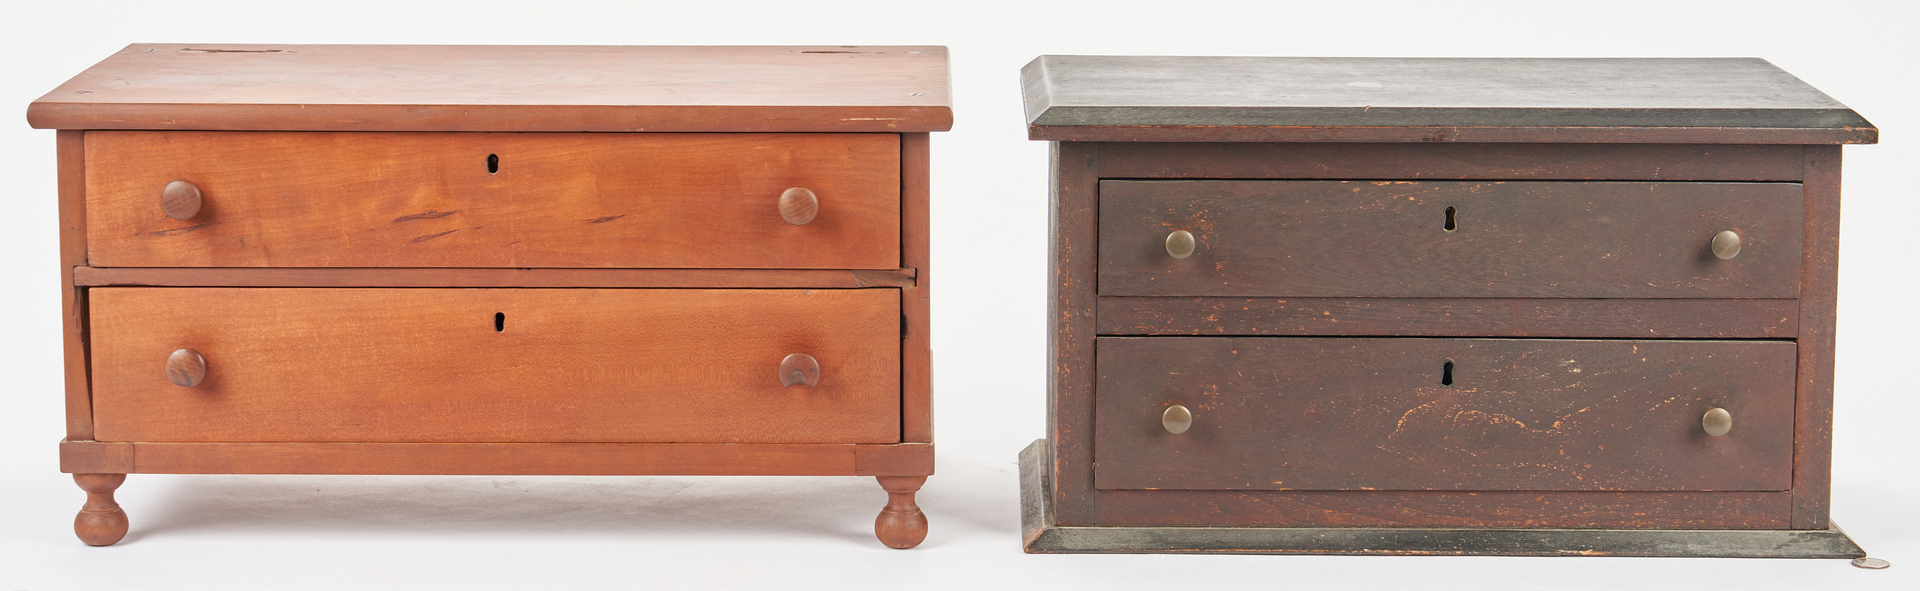 Lot 363: 2 Southern Cherry and Walnut Two-Drawer Storage Cabinets